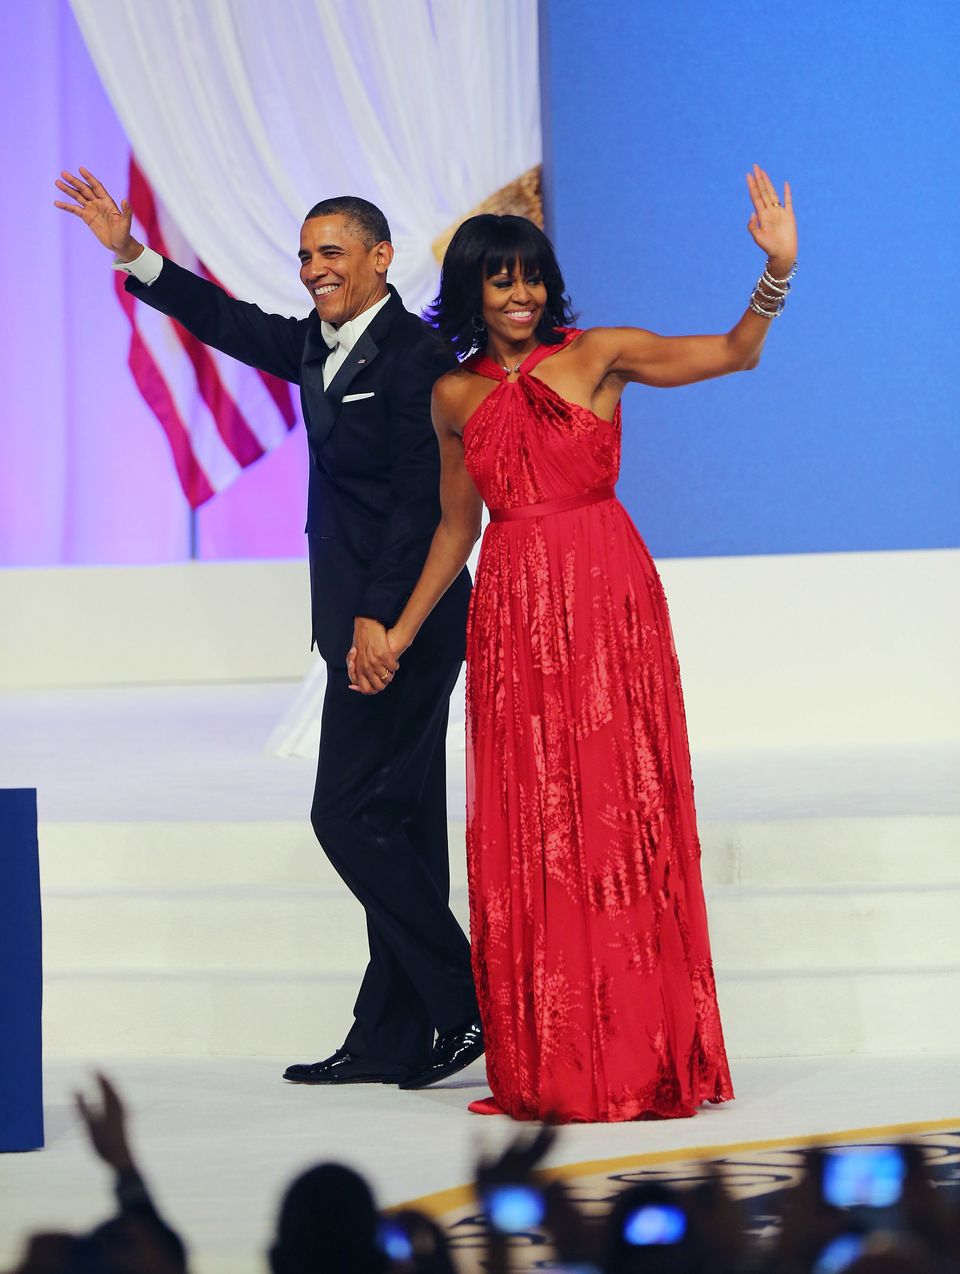 Michelle Obama Dress At The Inauguration Ball 2013: Jason Wu Red Gown ...